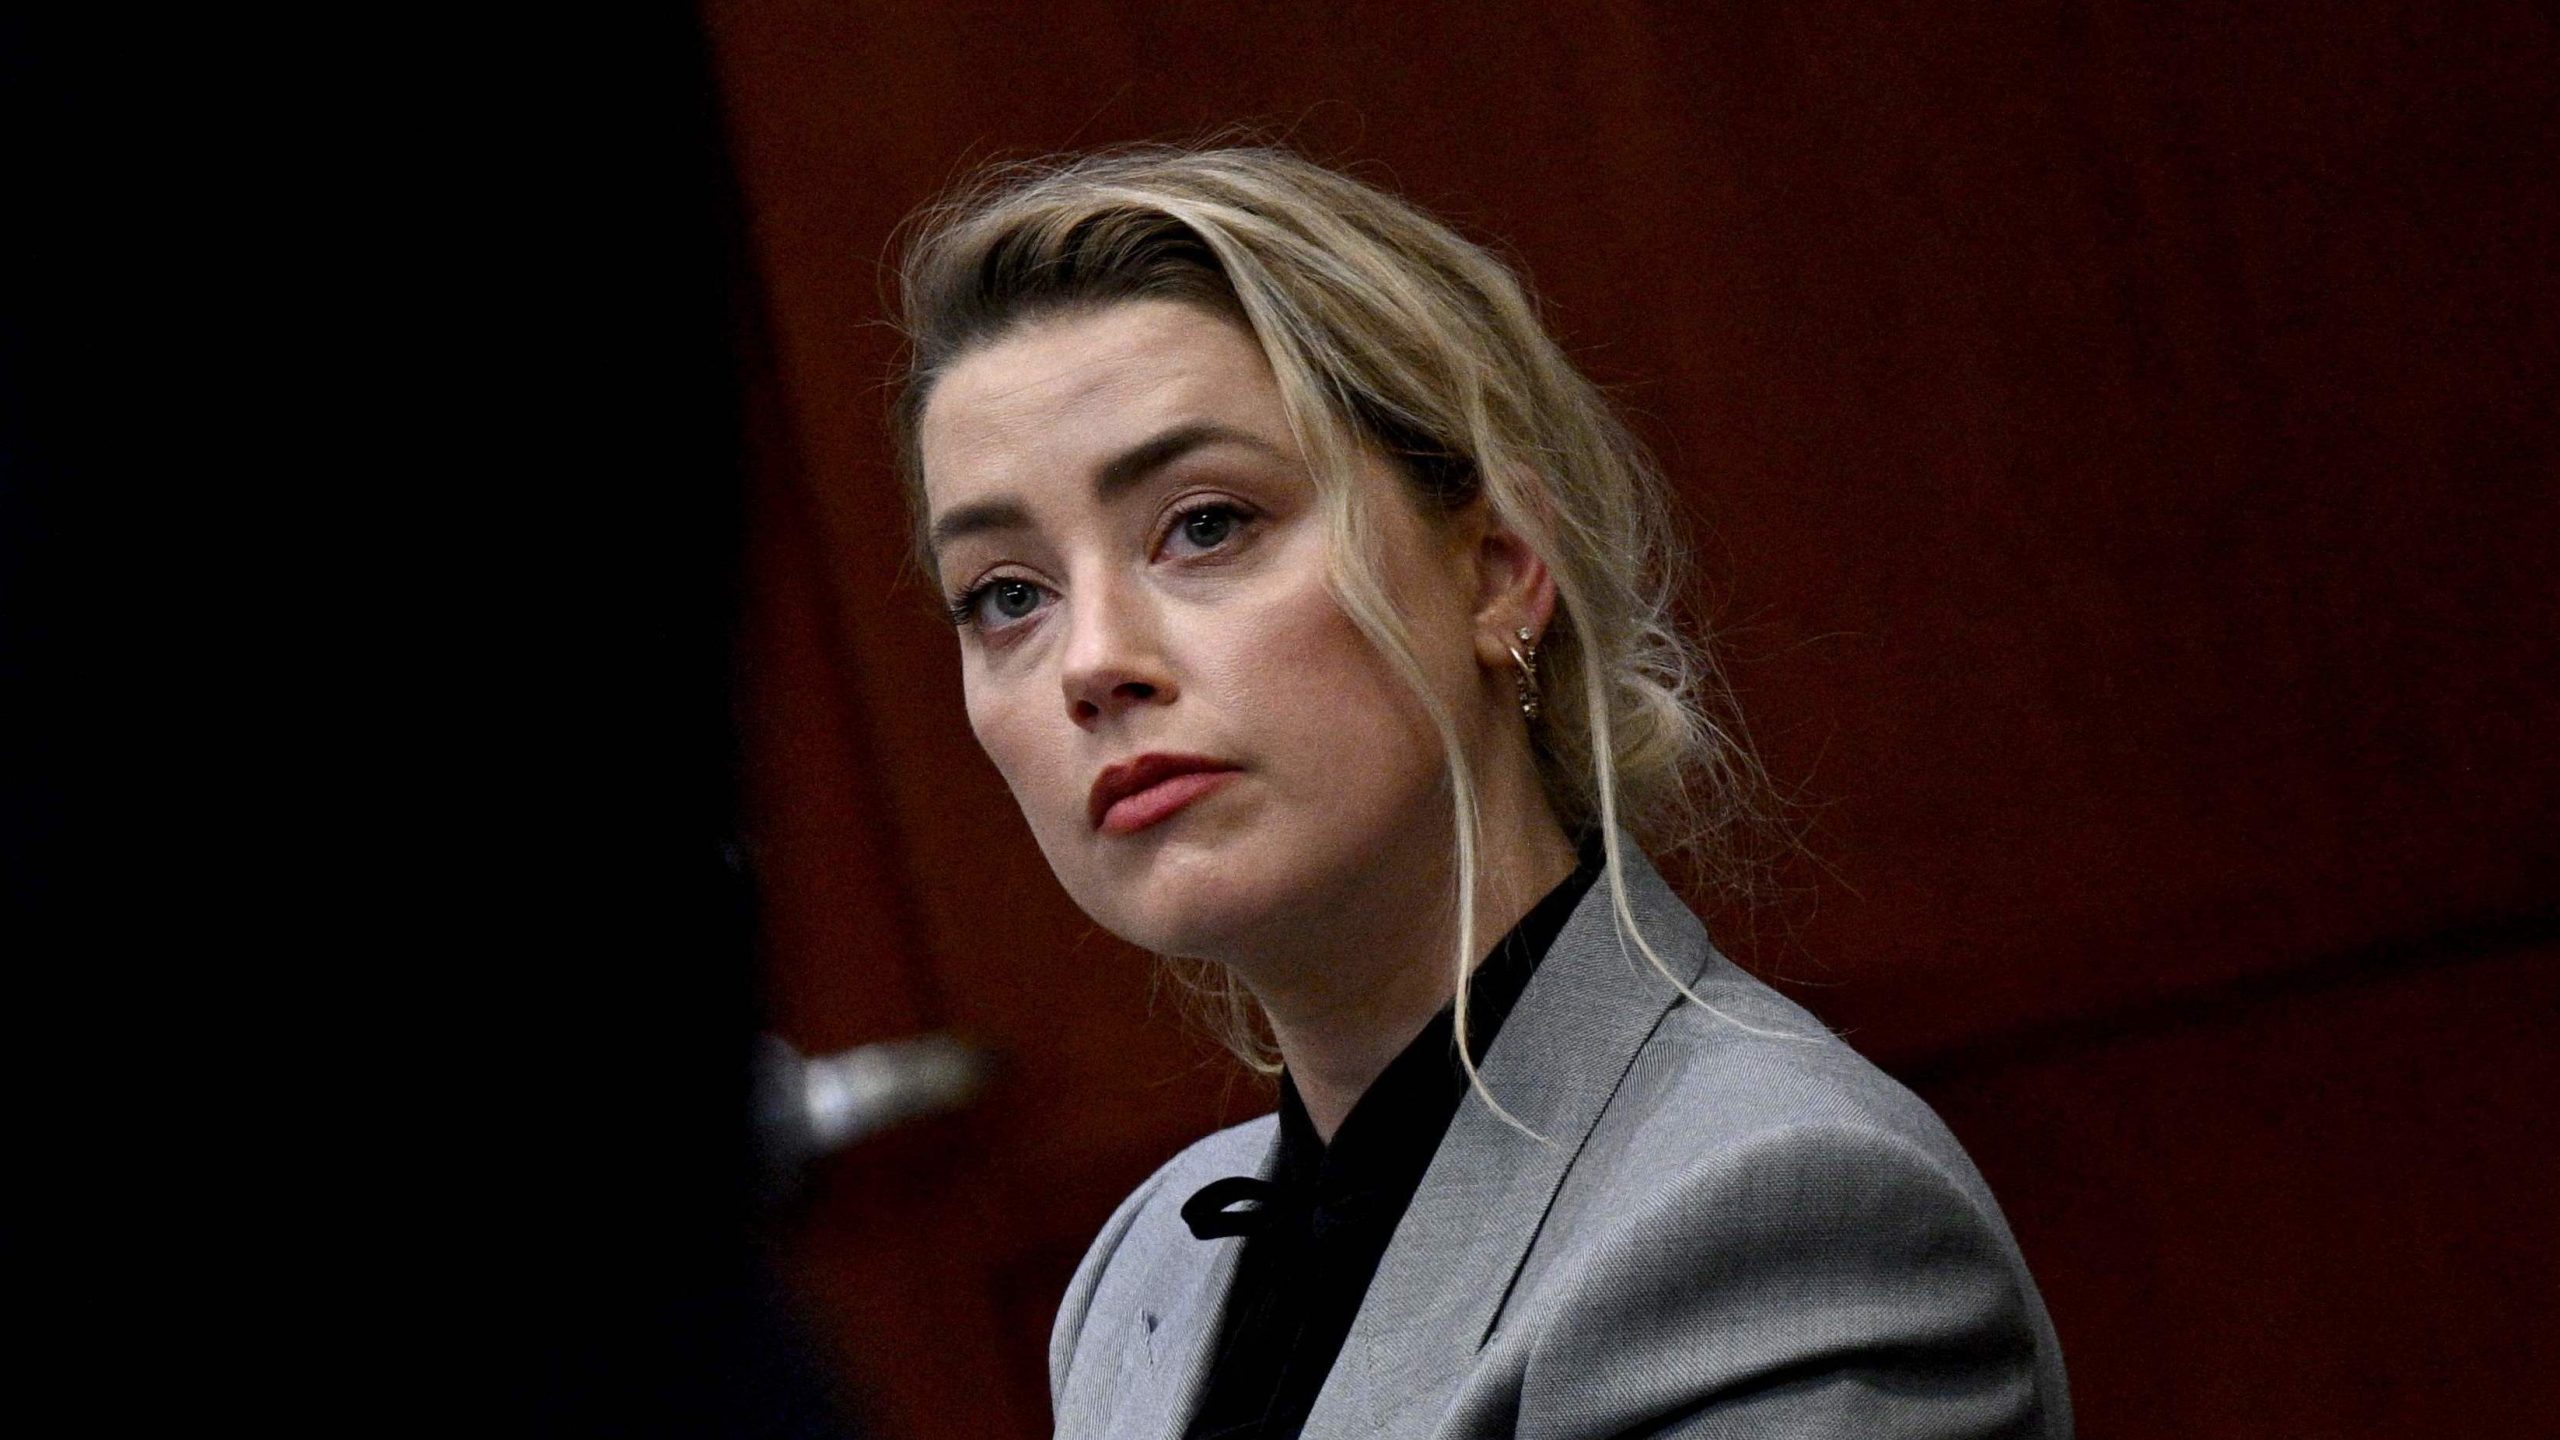 US actress Amber Heard (R) listens during the $50 million Depp vs Heard defamation trial at the Fairfax County Circuit Court in Fairfax, Virginia, on April 12, 2022. - Allegations of domestic abuse levelled against Johnny Depp by Amber Heard have had a "devastating" impact on his career, his lawyers said Tuesday at the opening of the actor's defamation case against his former wife. (Photo by BRENDAN SMIALOWSKI / POOL / AFP) (Photo by BRENDAN SMIALOWSKI/POOL/AFP via Getty Images)